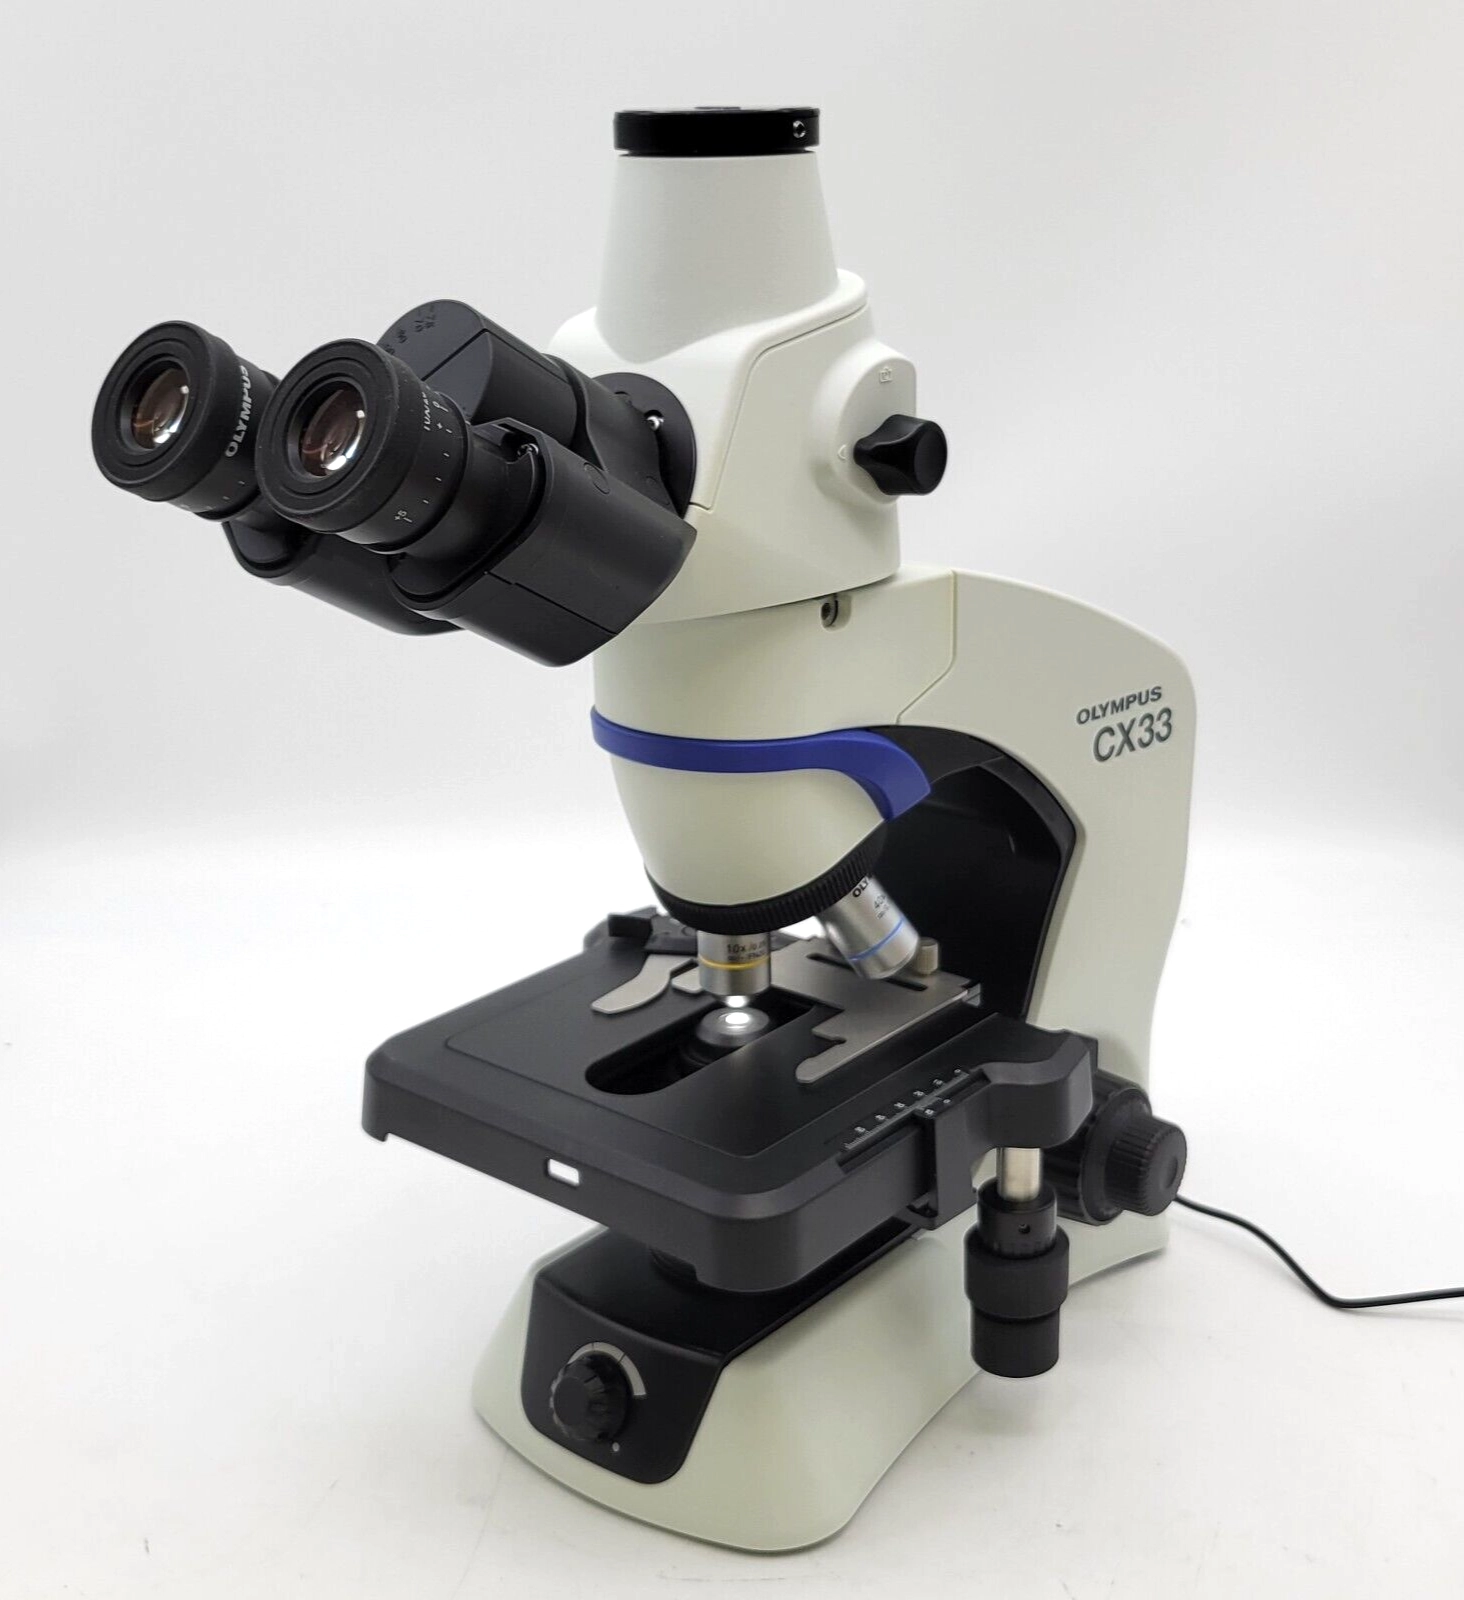 Olympus Microscope CX33 LED with 4x, 10x, 40x Objectives and Trinocular Head